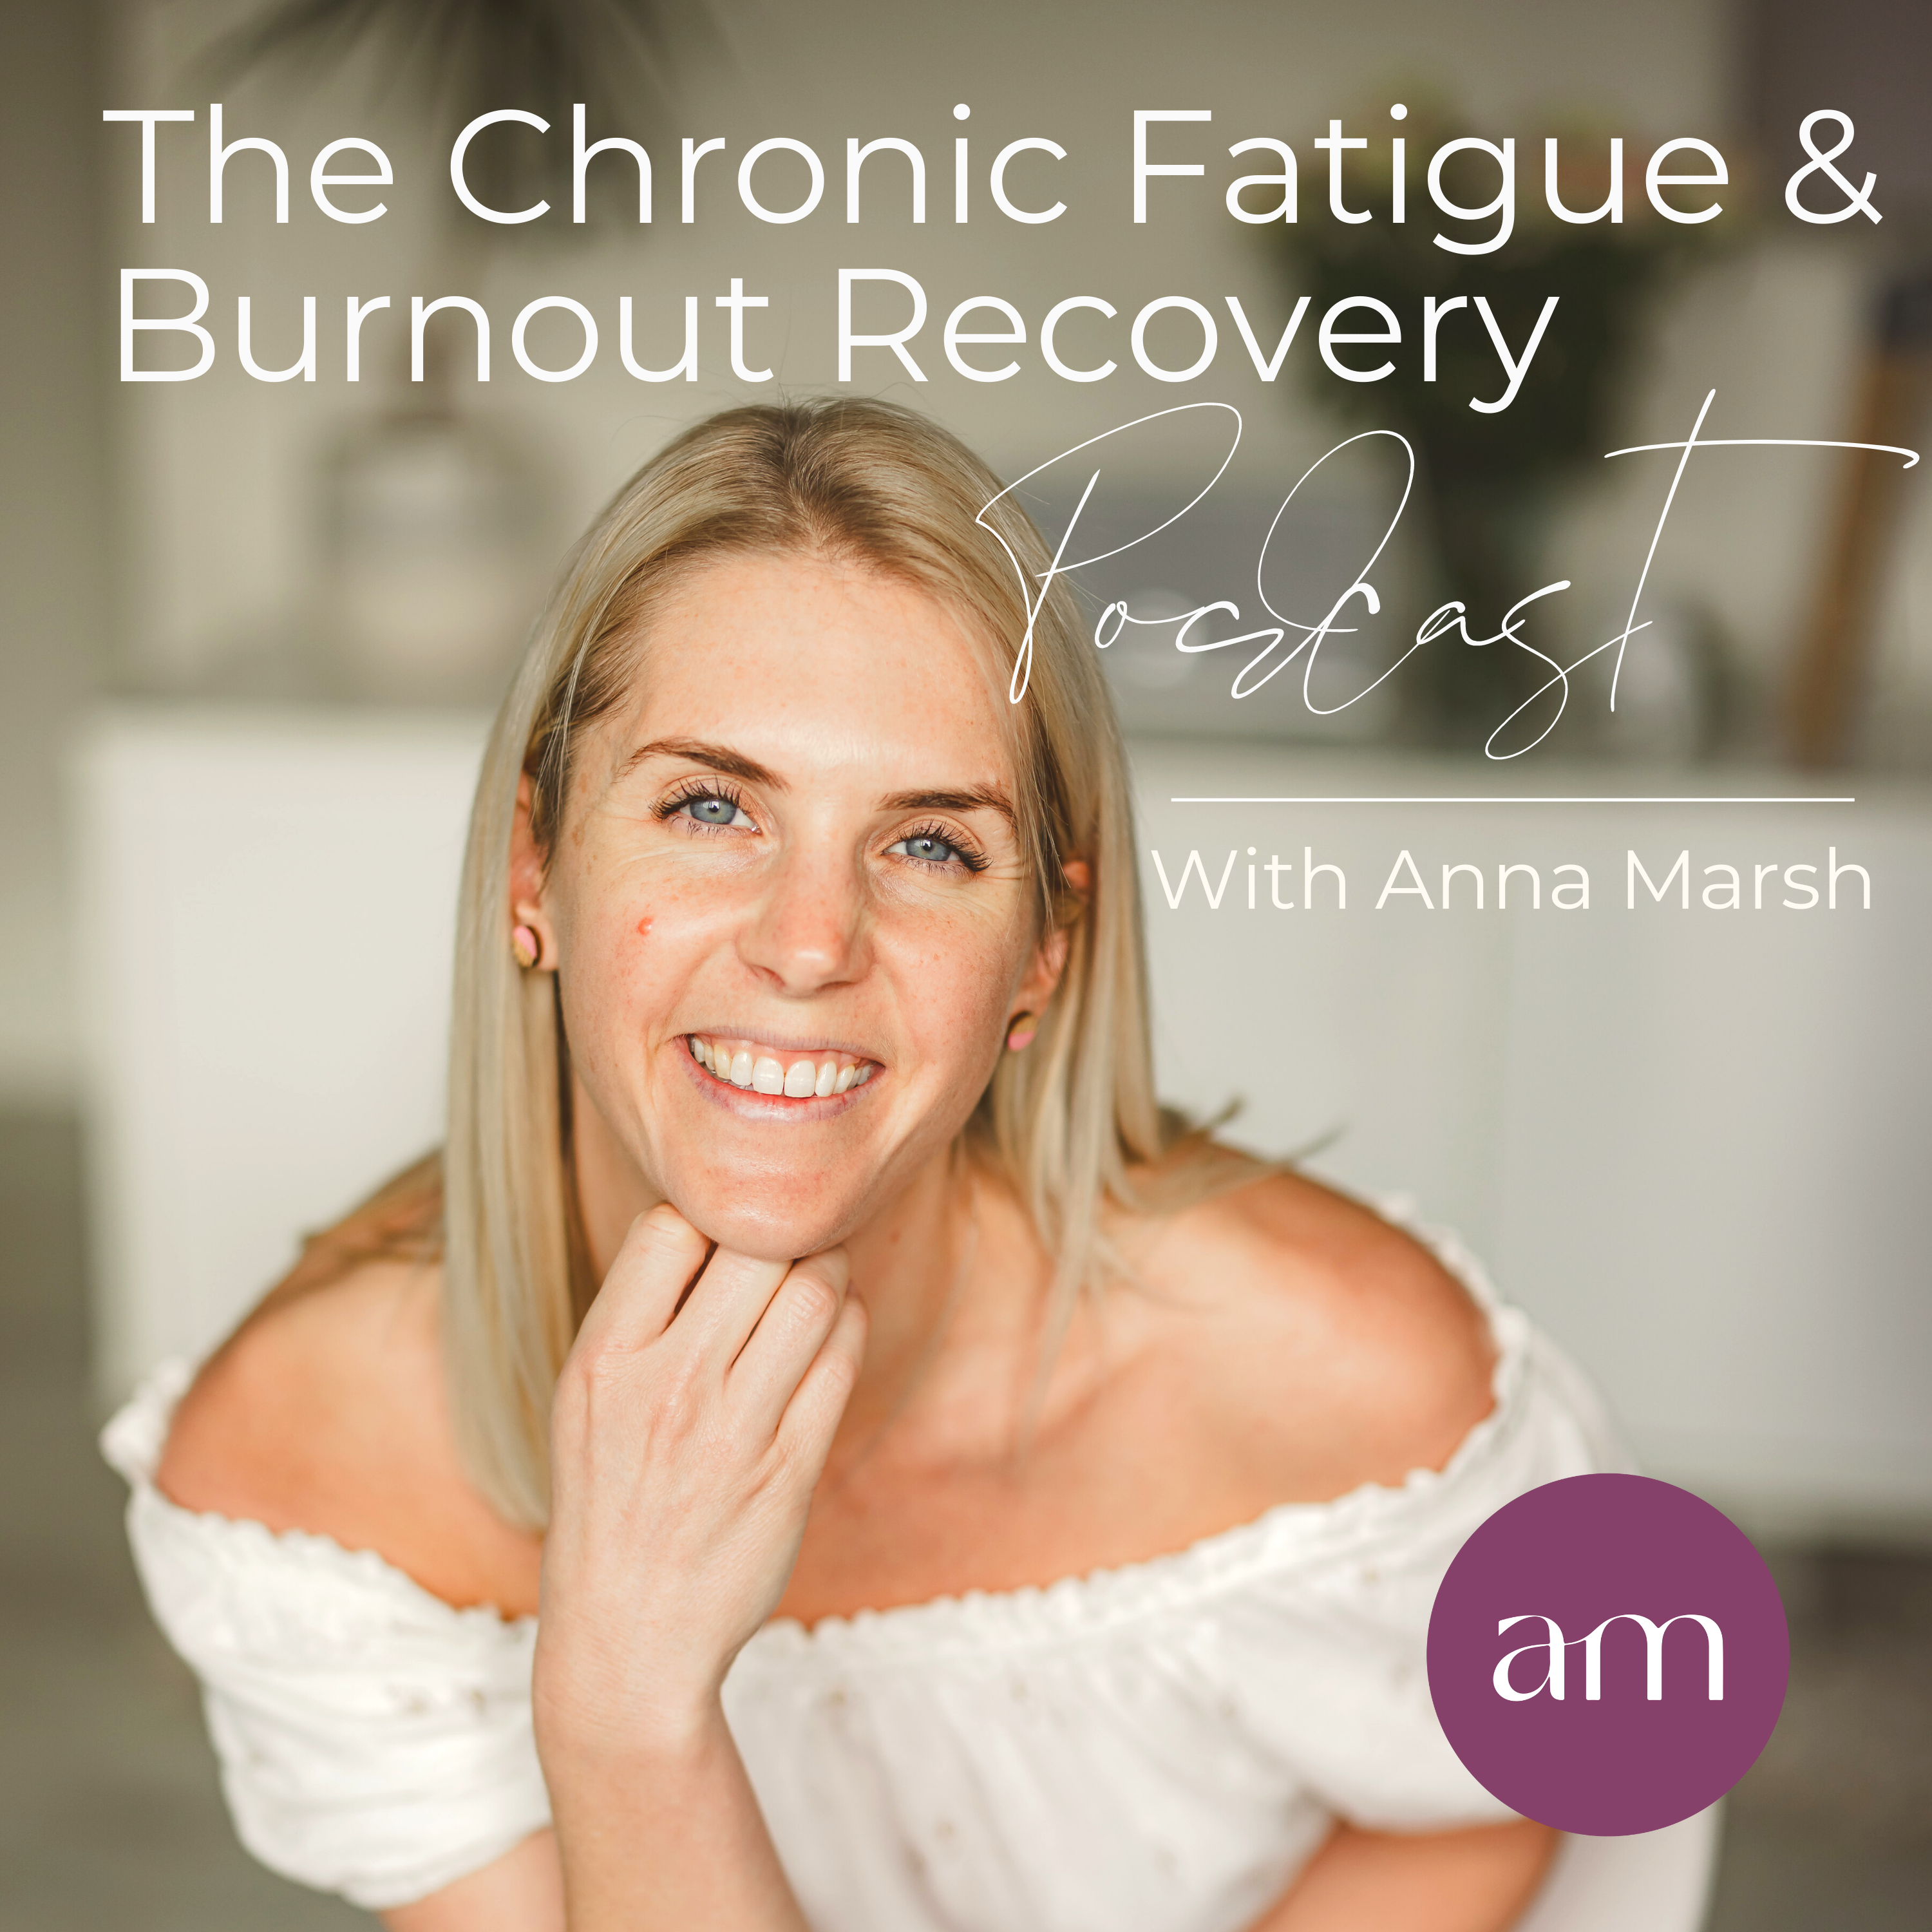 Episode 3: Causes of Fatigue Generally and Chronic Fatigue Specifically